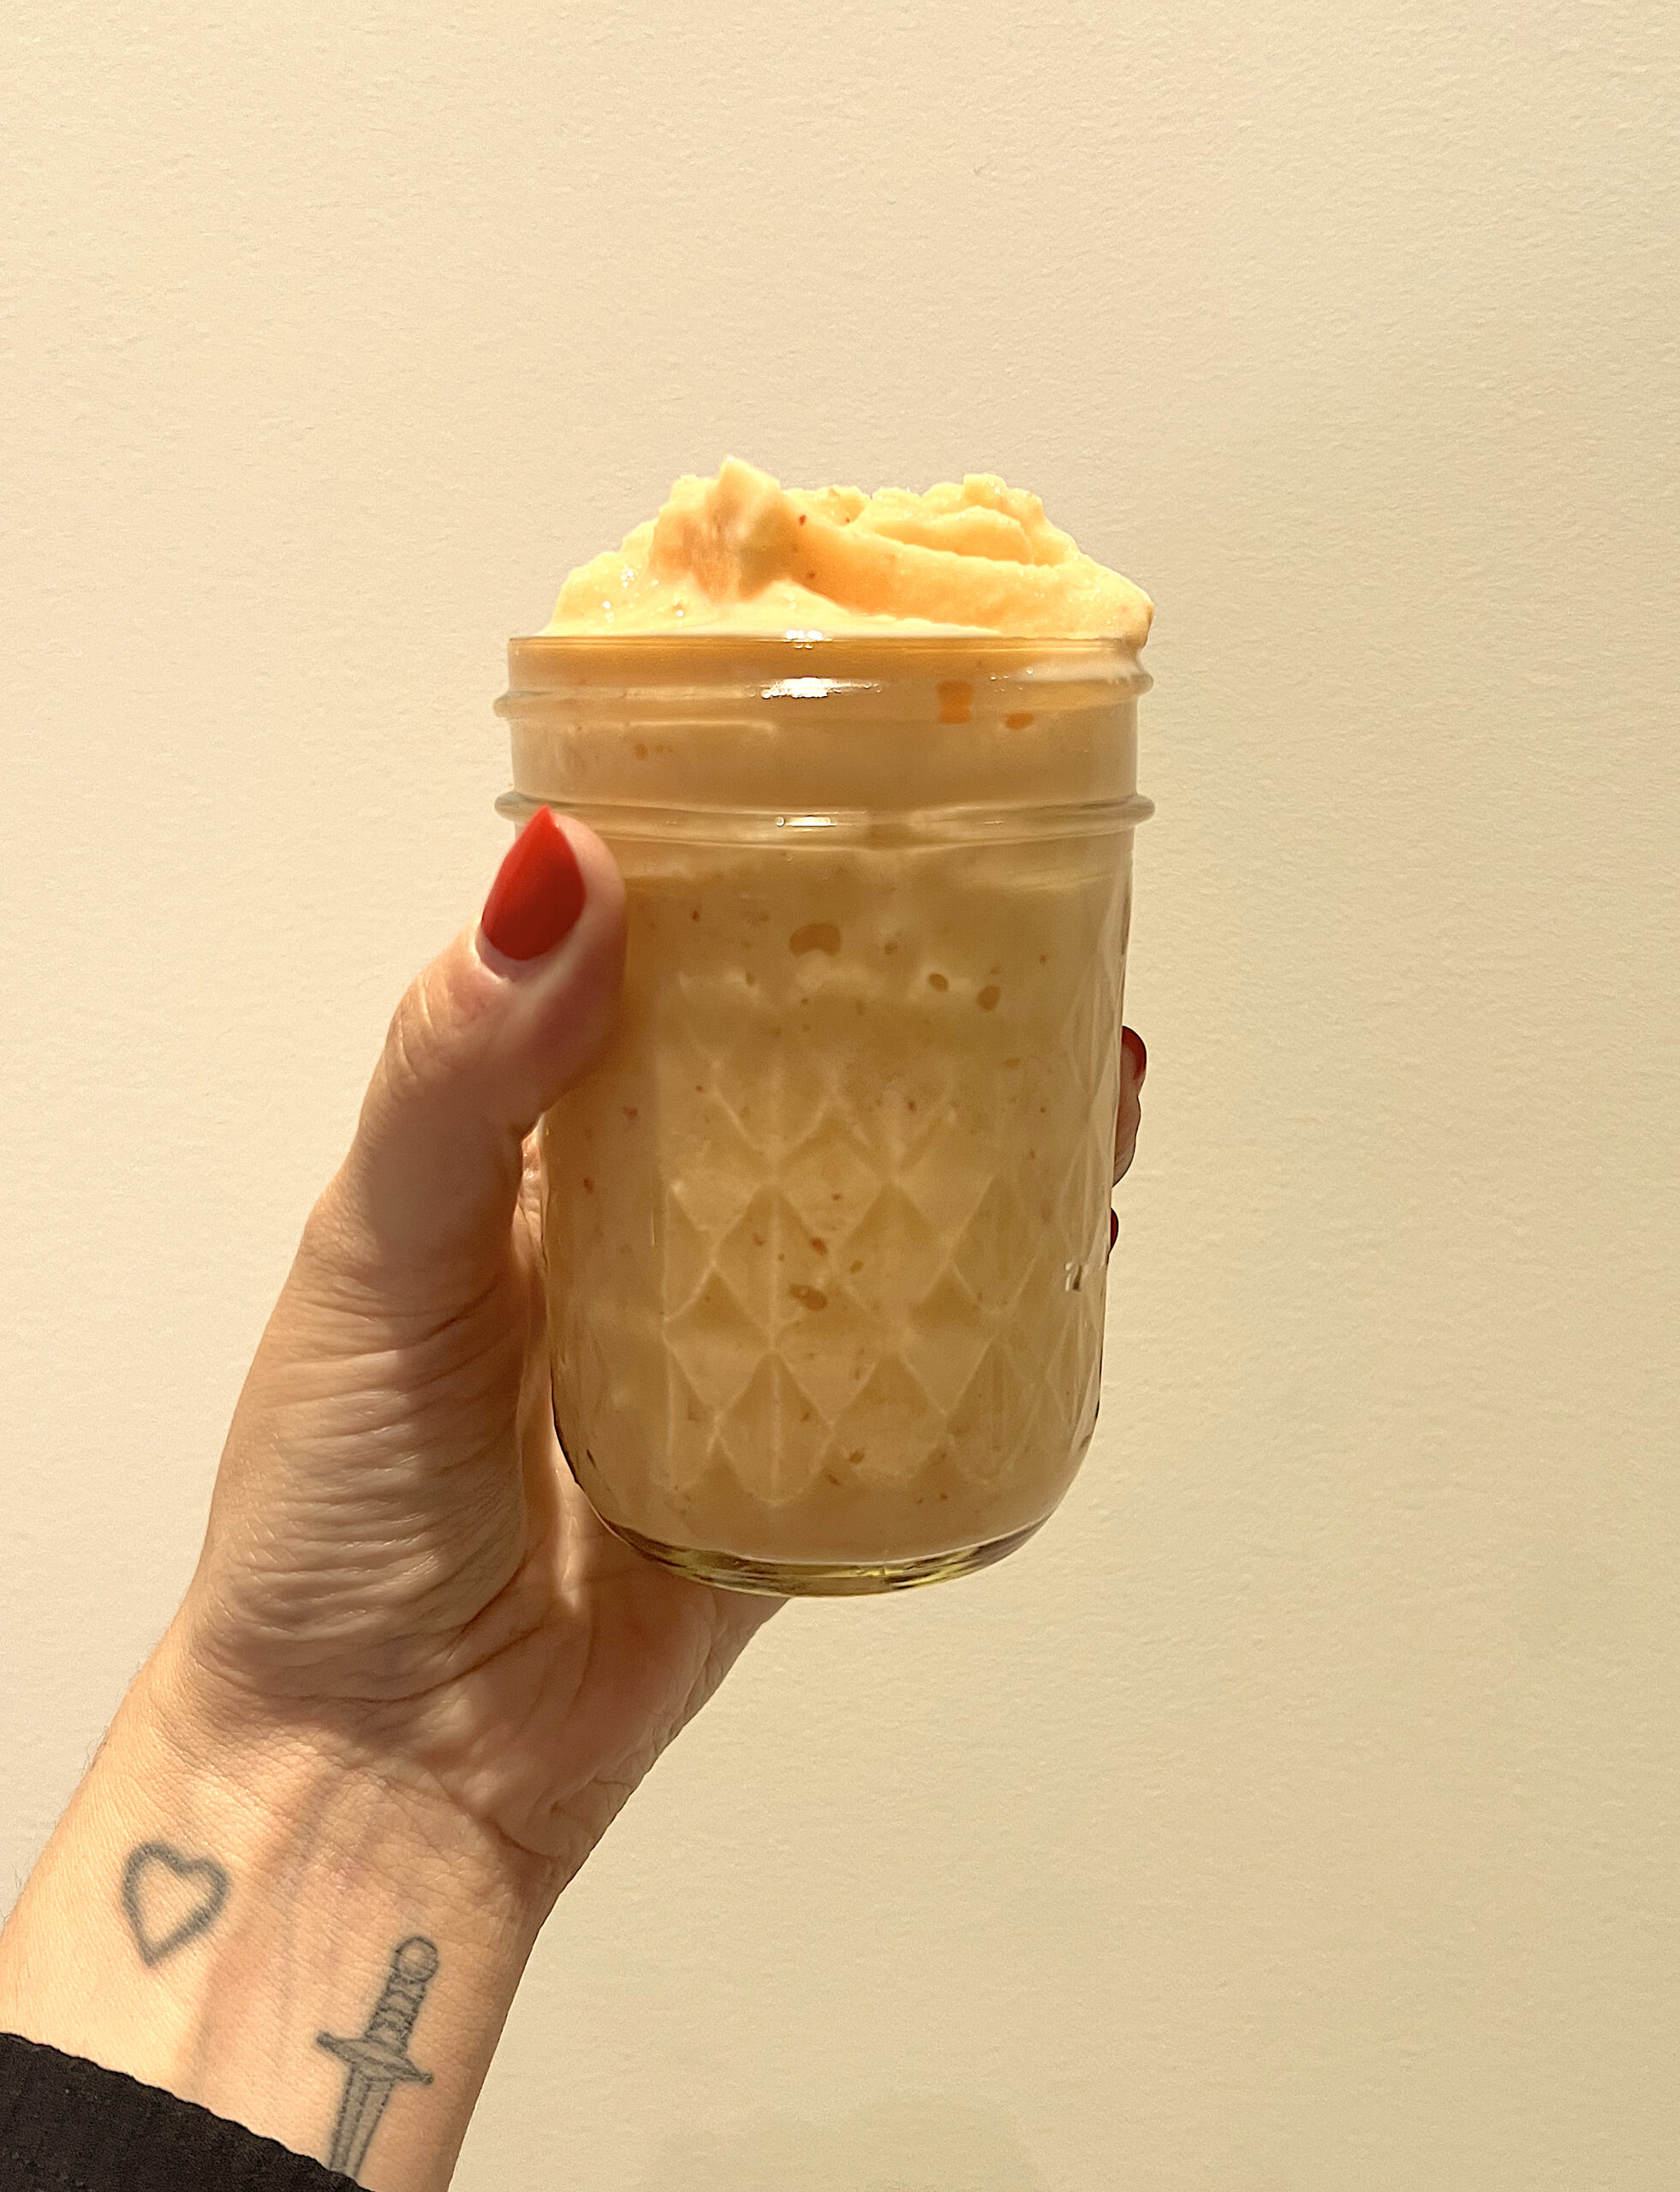 A tattooed wrist and painted nails holds up a small orange smoothie in a glass jar